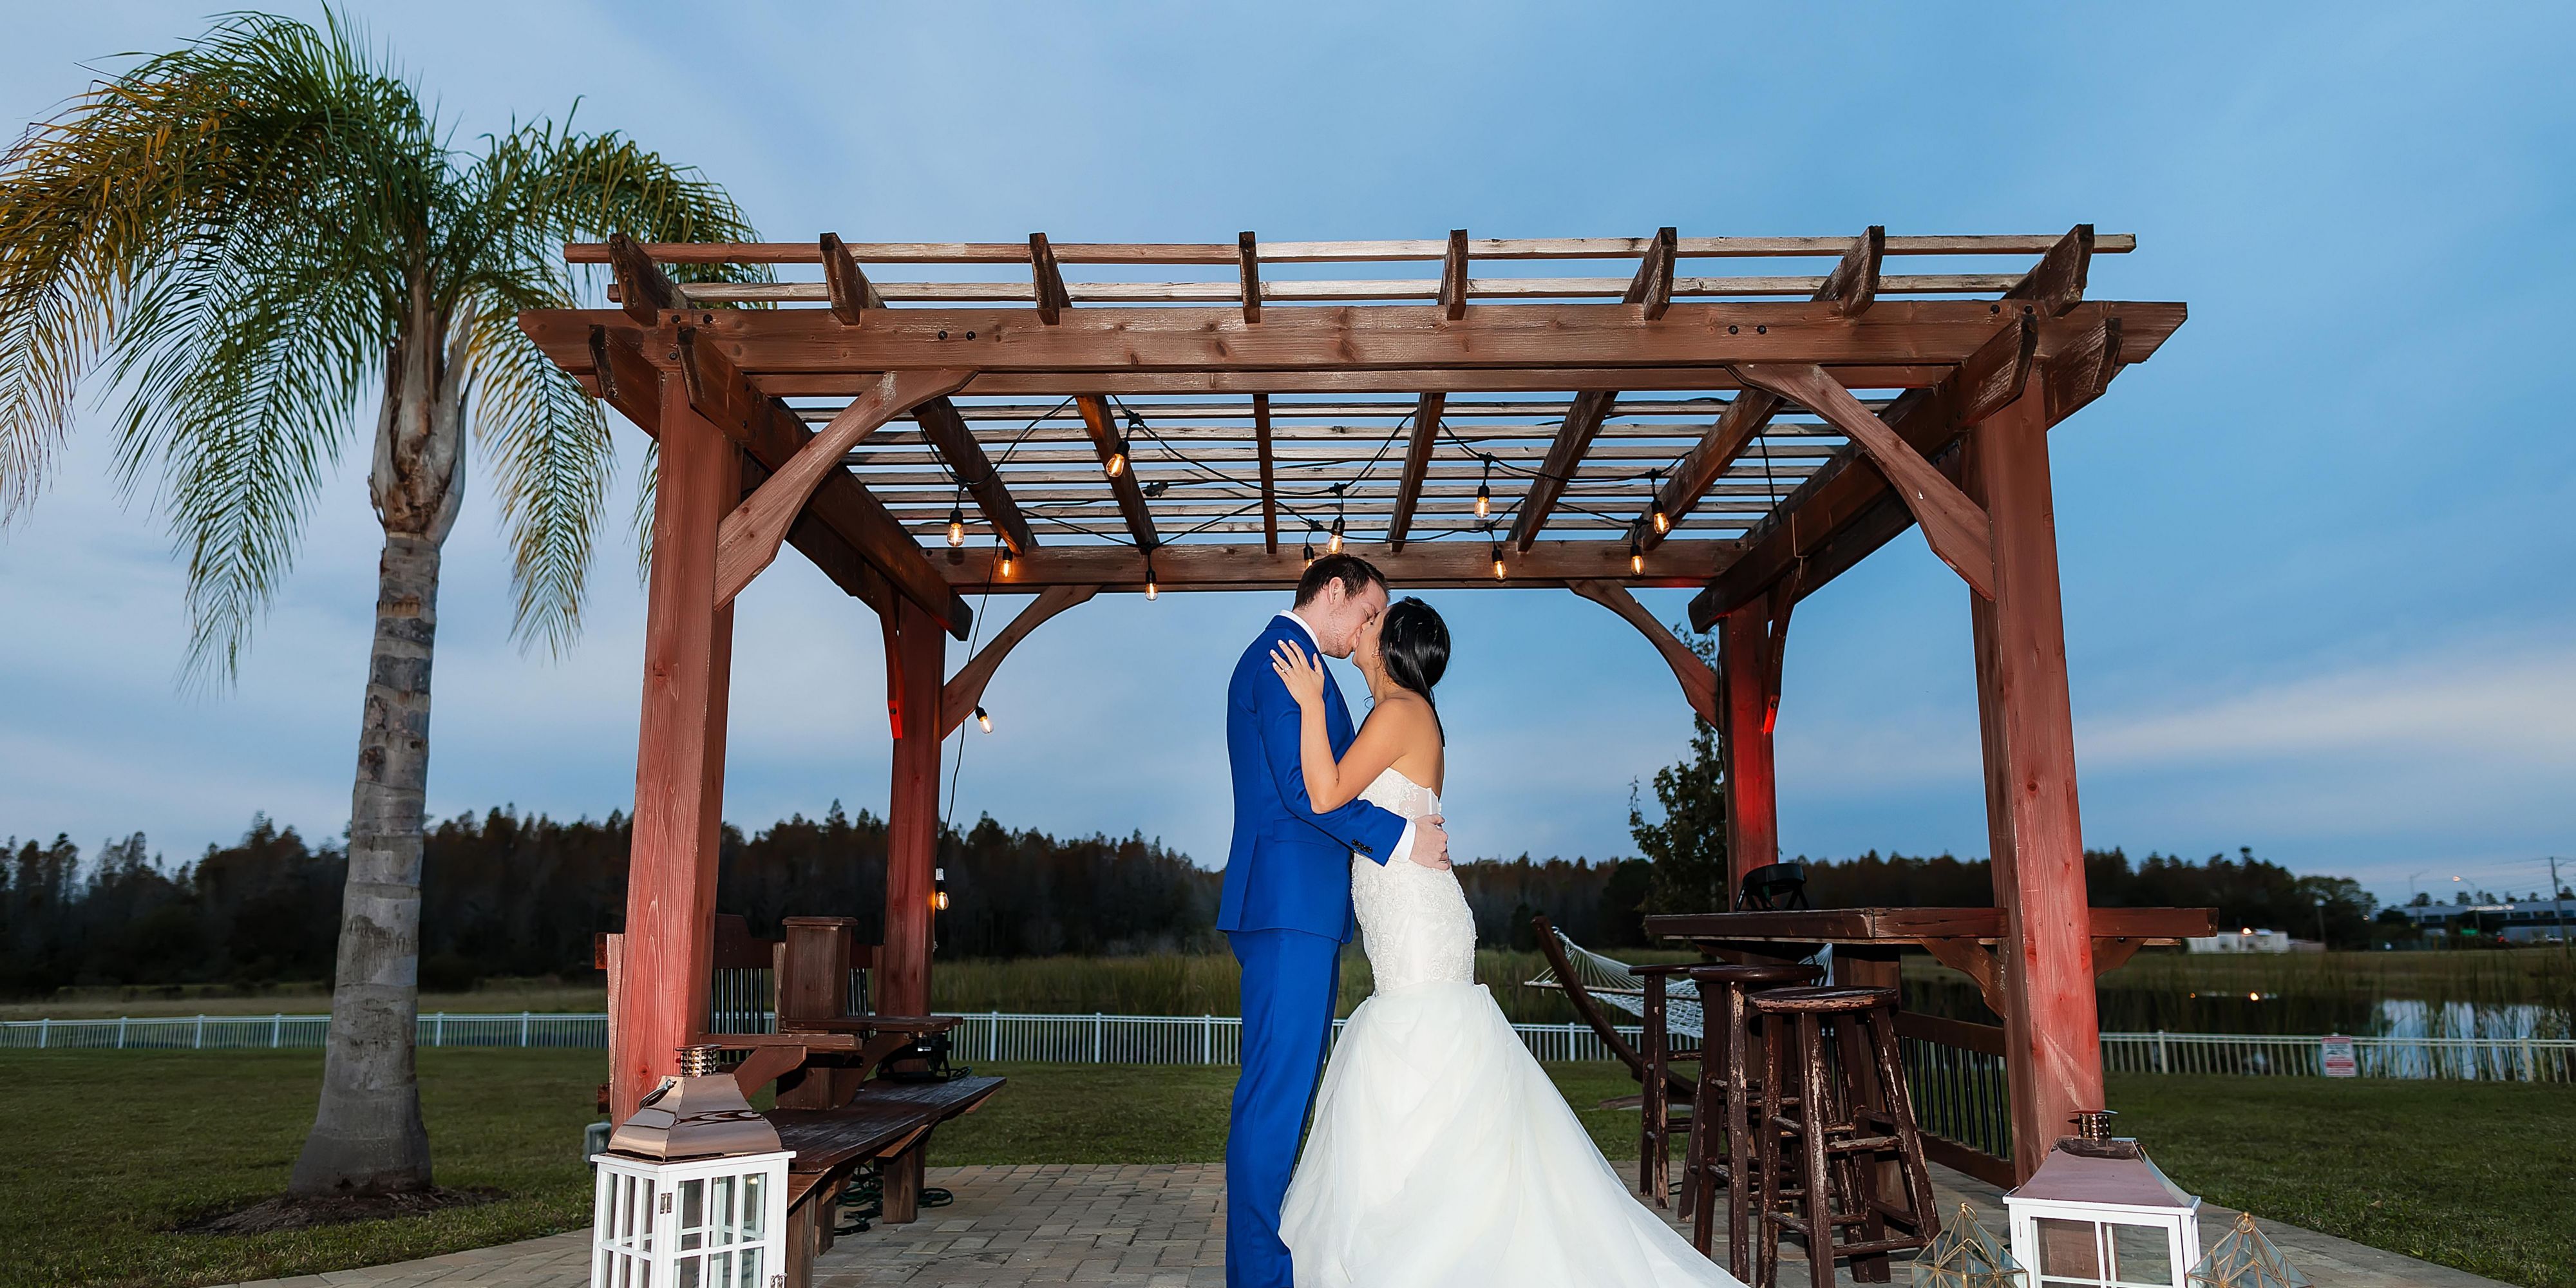 We're offering expanded wedding & social event packages. Our picturesque tropical deck and lakeside lawn are perfect whether you are celebrating with a micro wedding, minimony, or elopement - and won't break the bank! To top it off, our in-house sales team, preferred vendors, and indoor backup space will help to make your day stress-free.